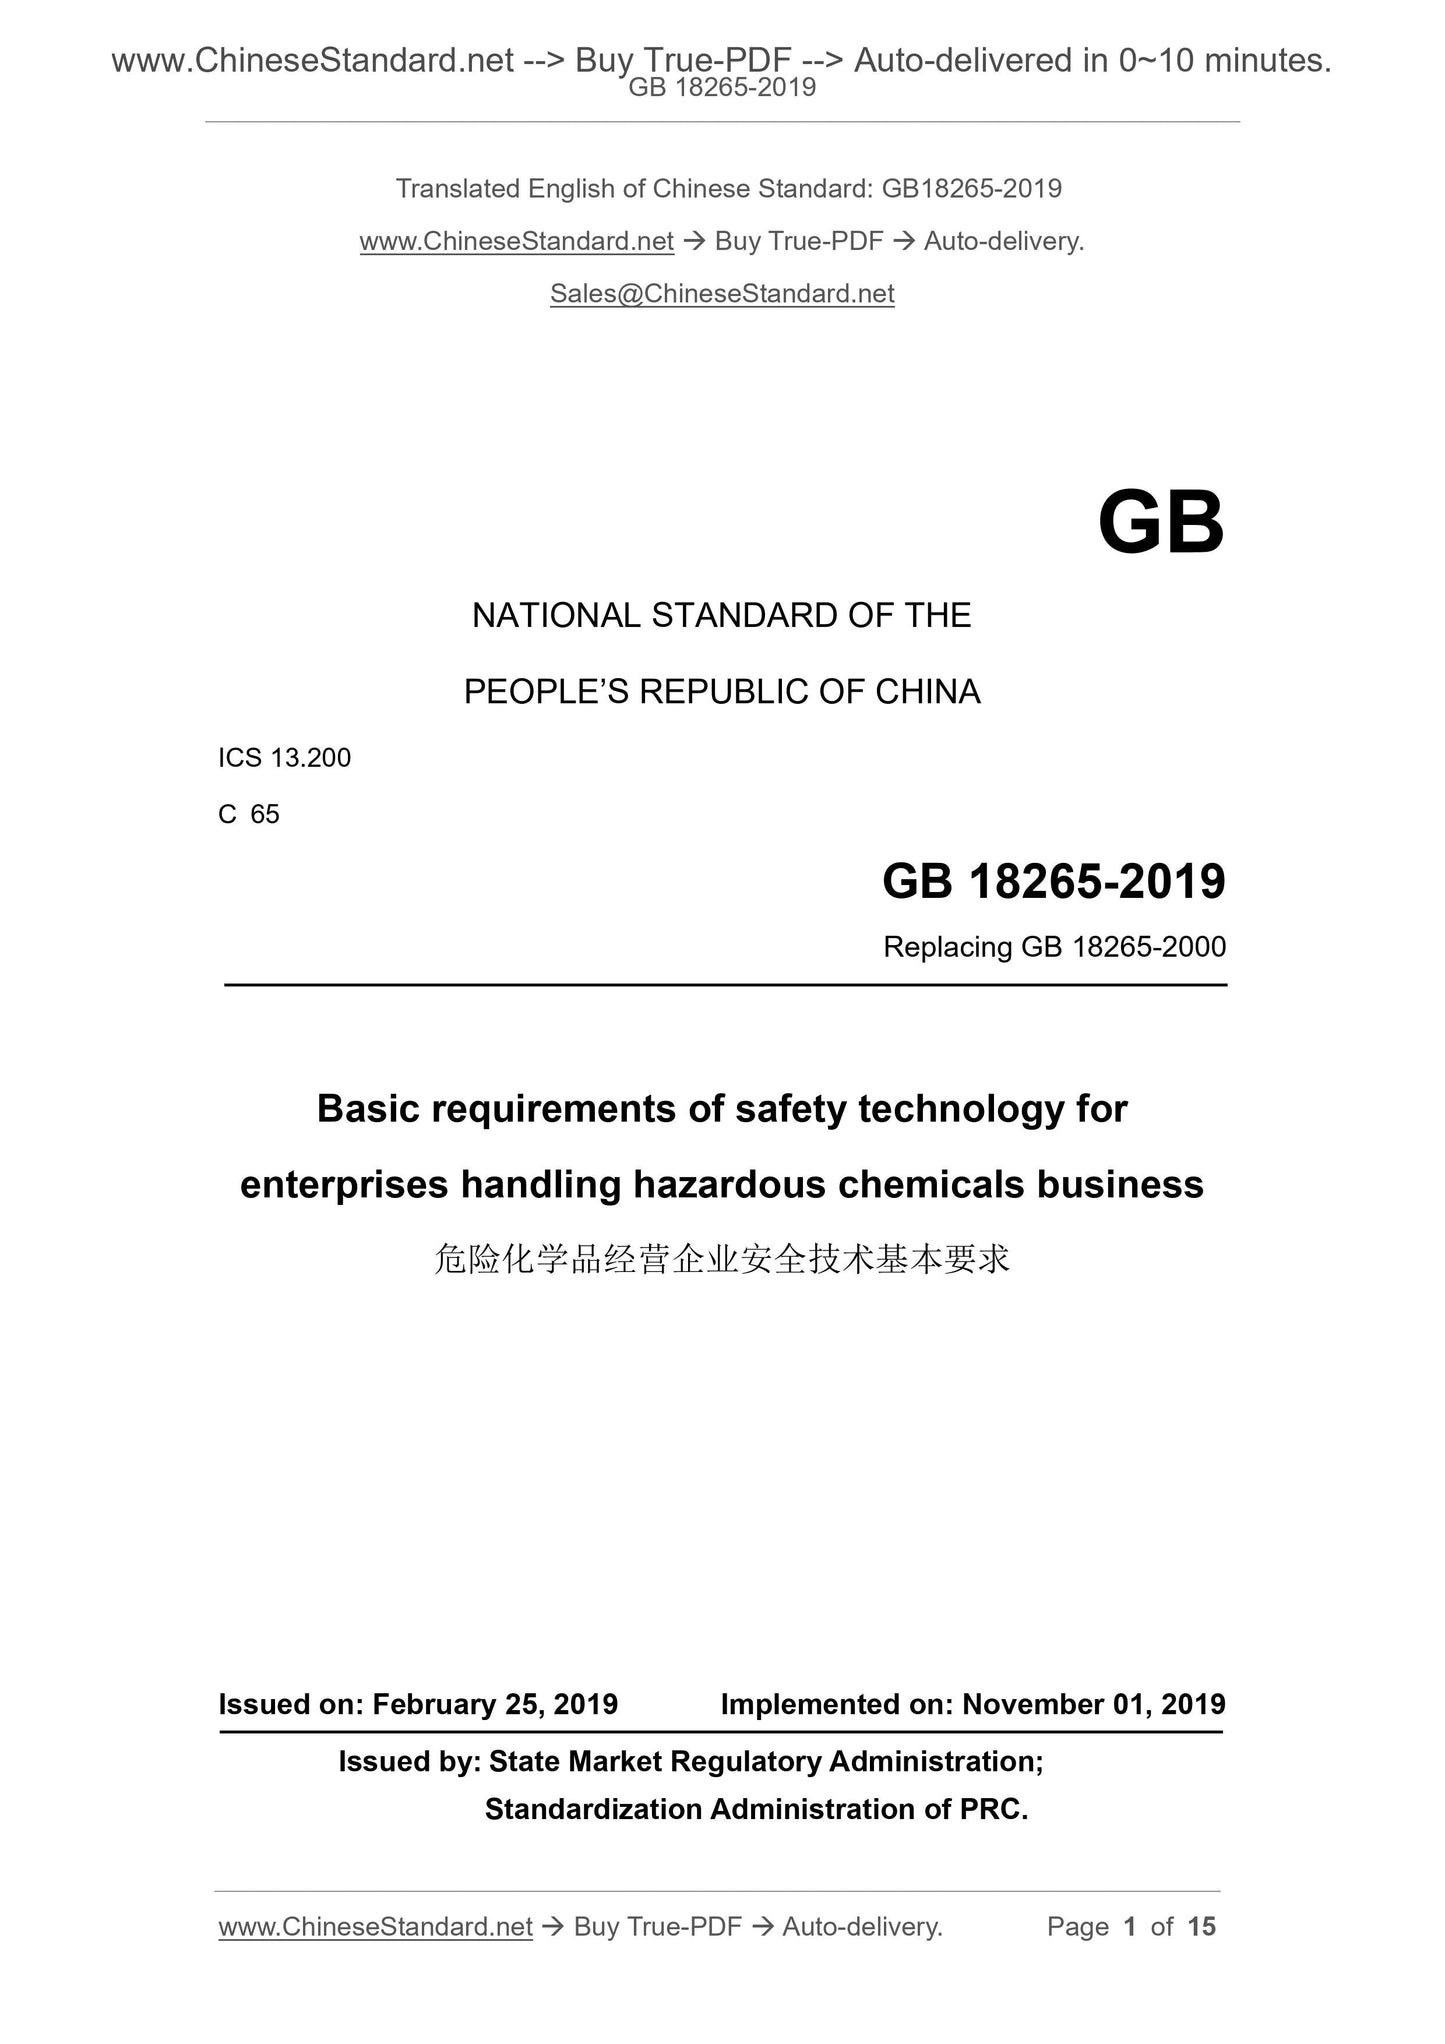 GB 18265-2019 Page 1